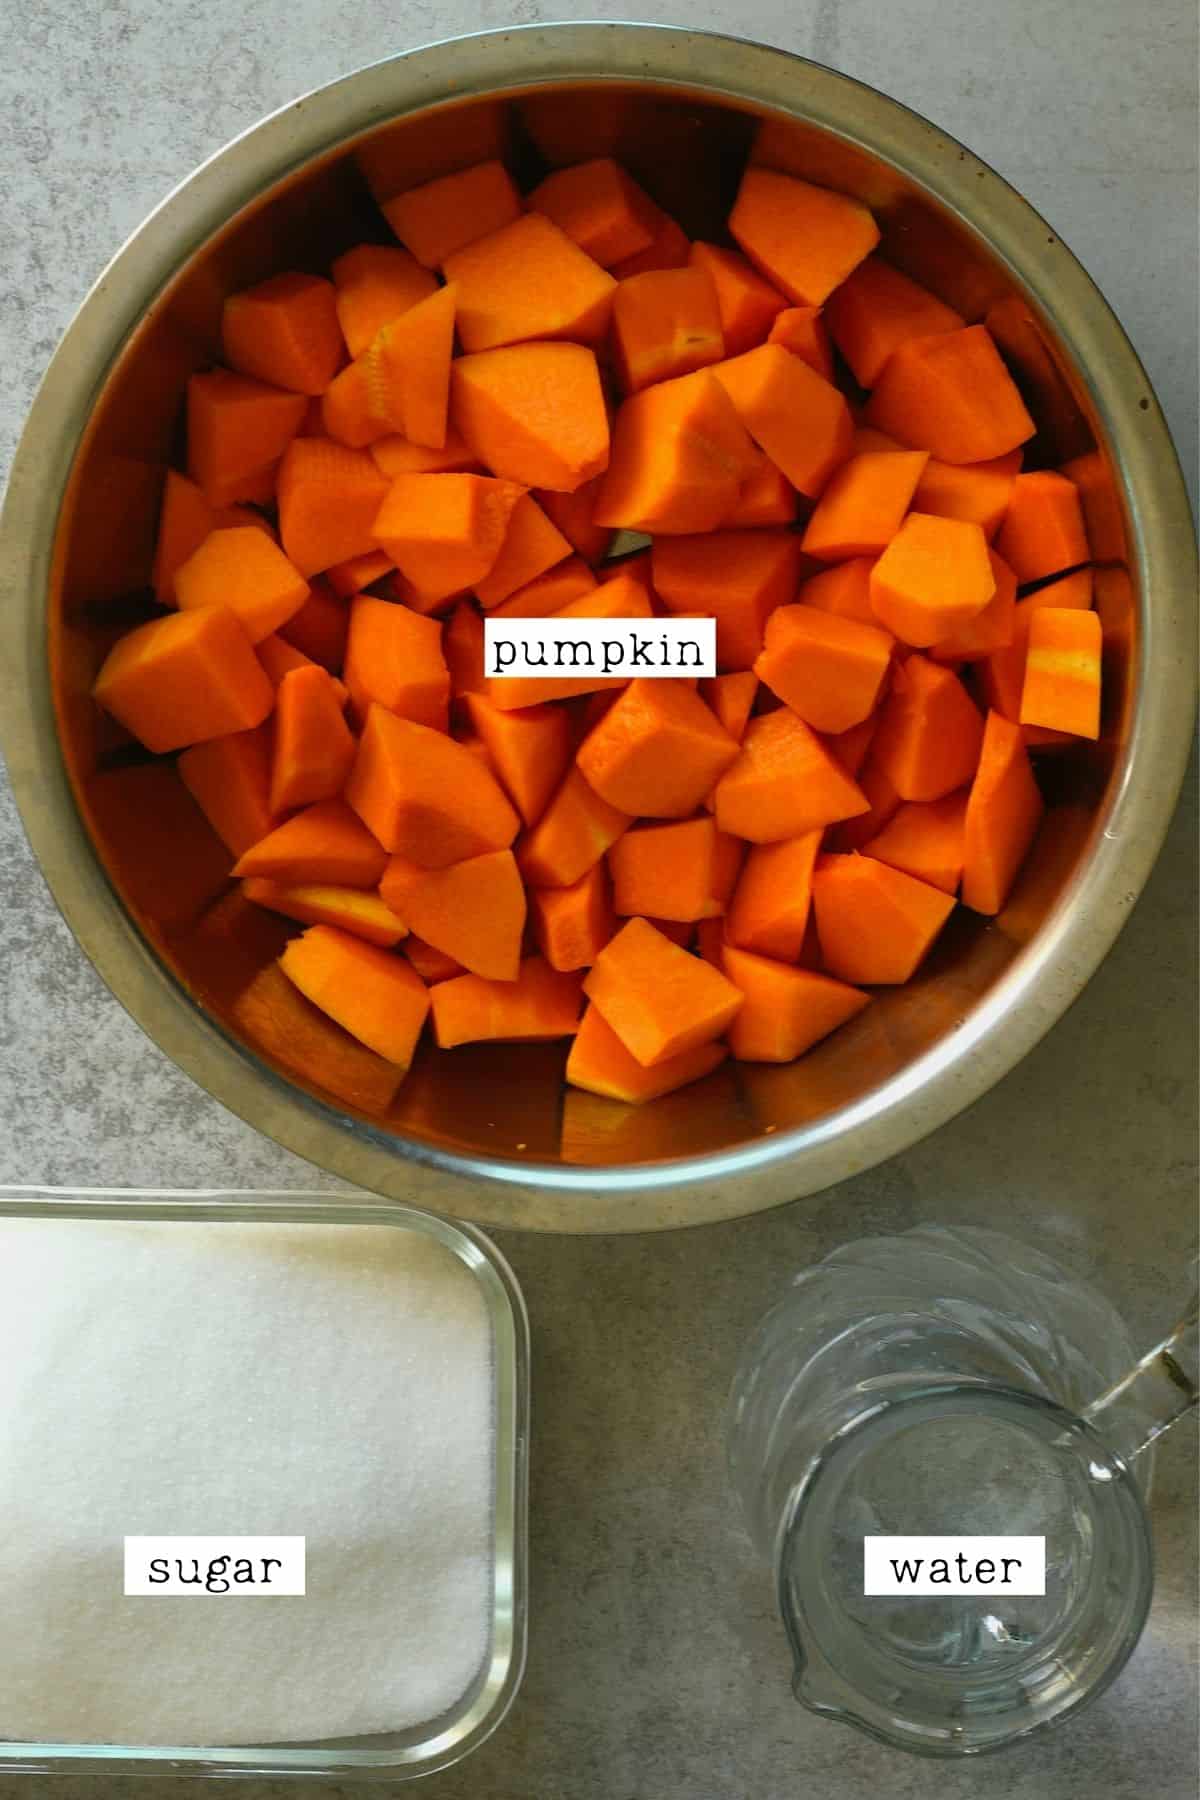 Ingredients for candied pumpkin